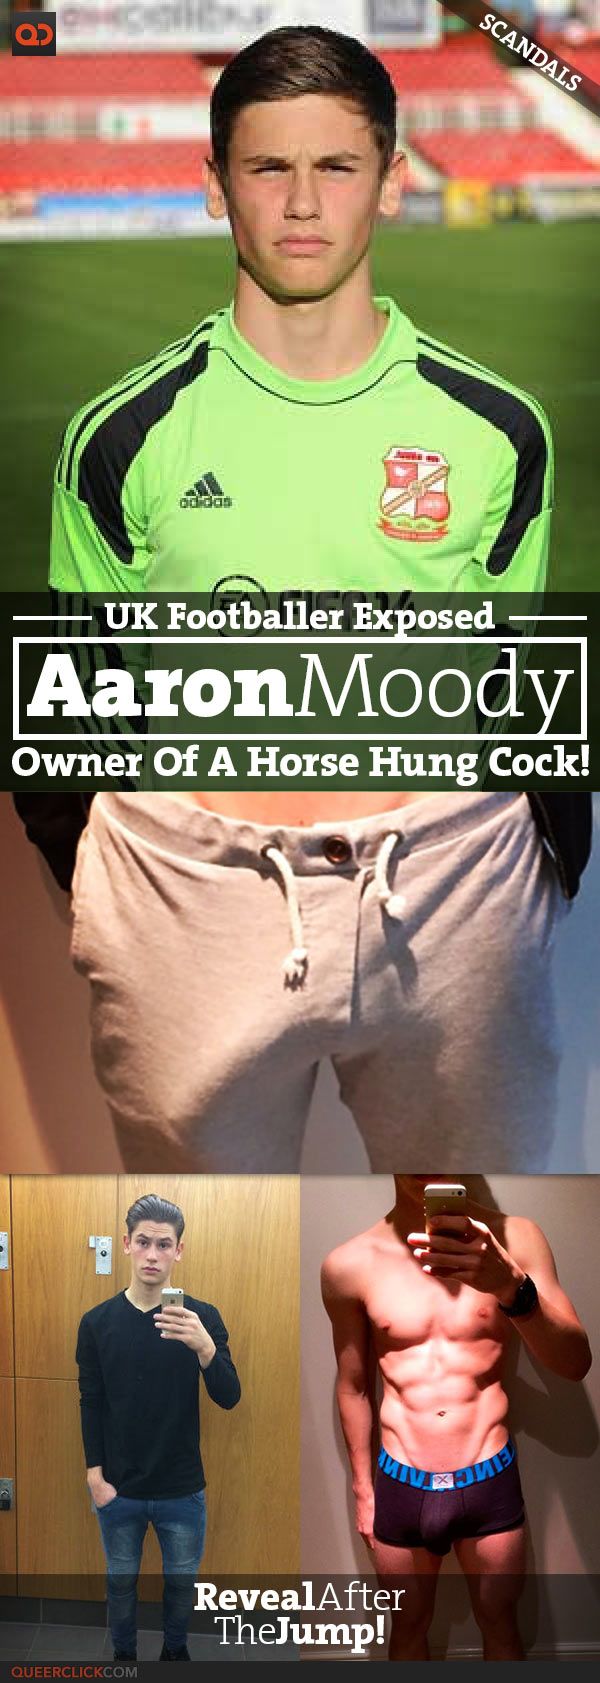 QC Scandals: UK Footballer Aaron Moody Unmasked As The Owner Of A Horse Hung Cock!